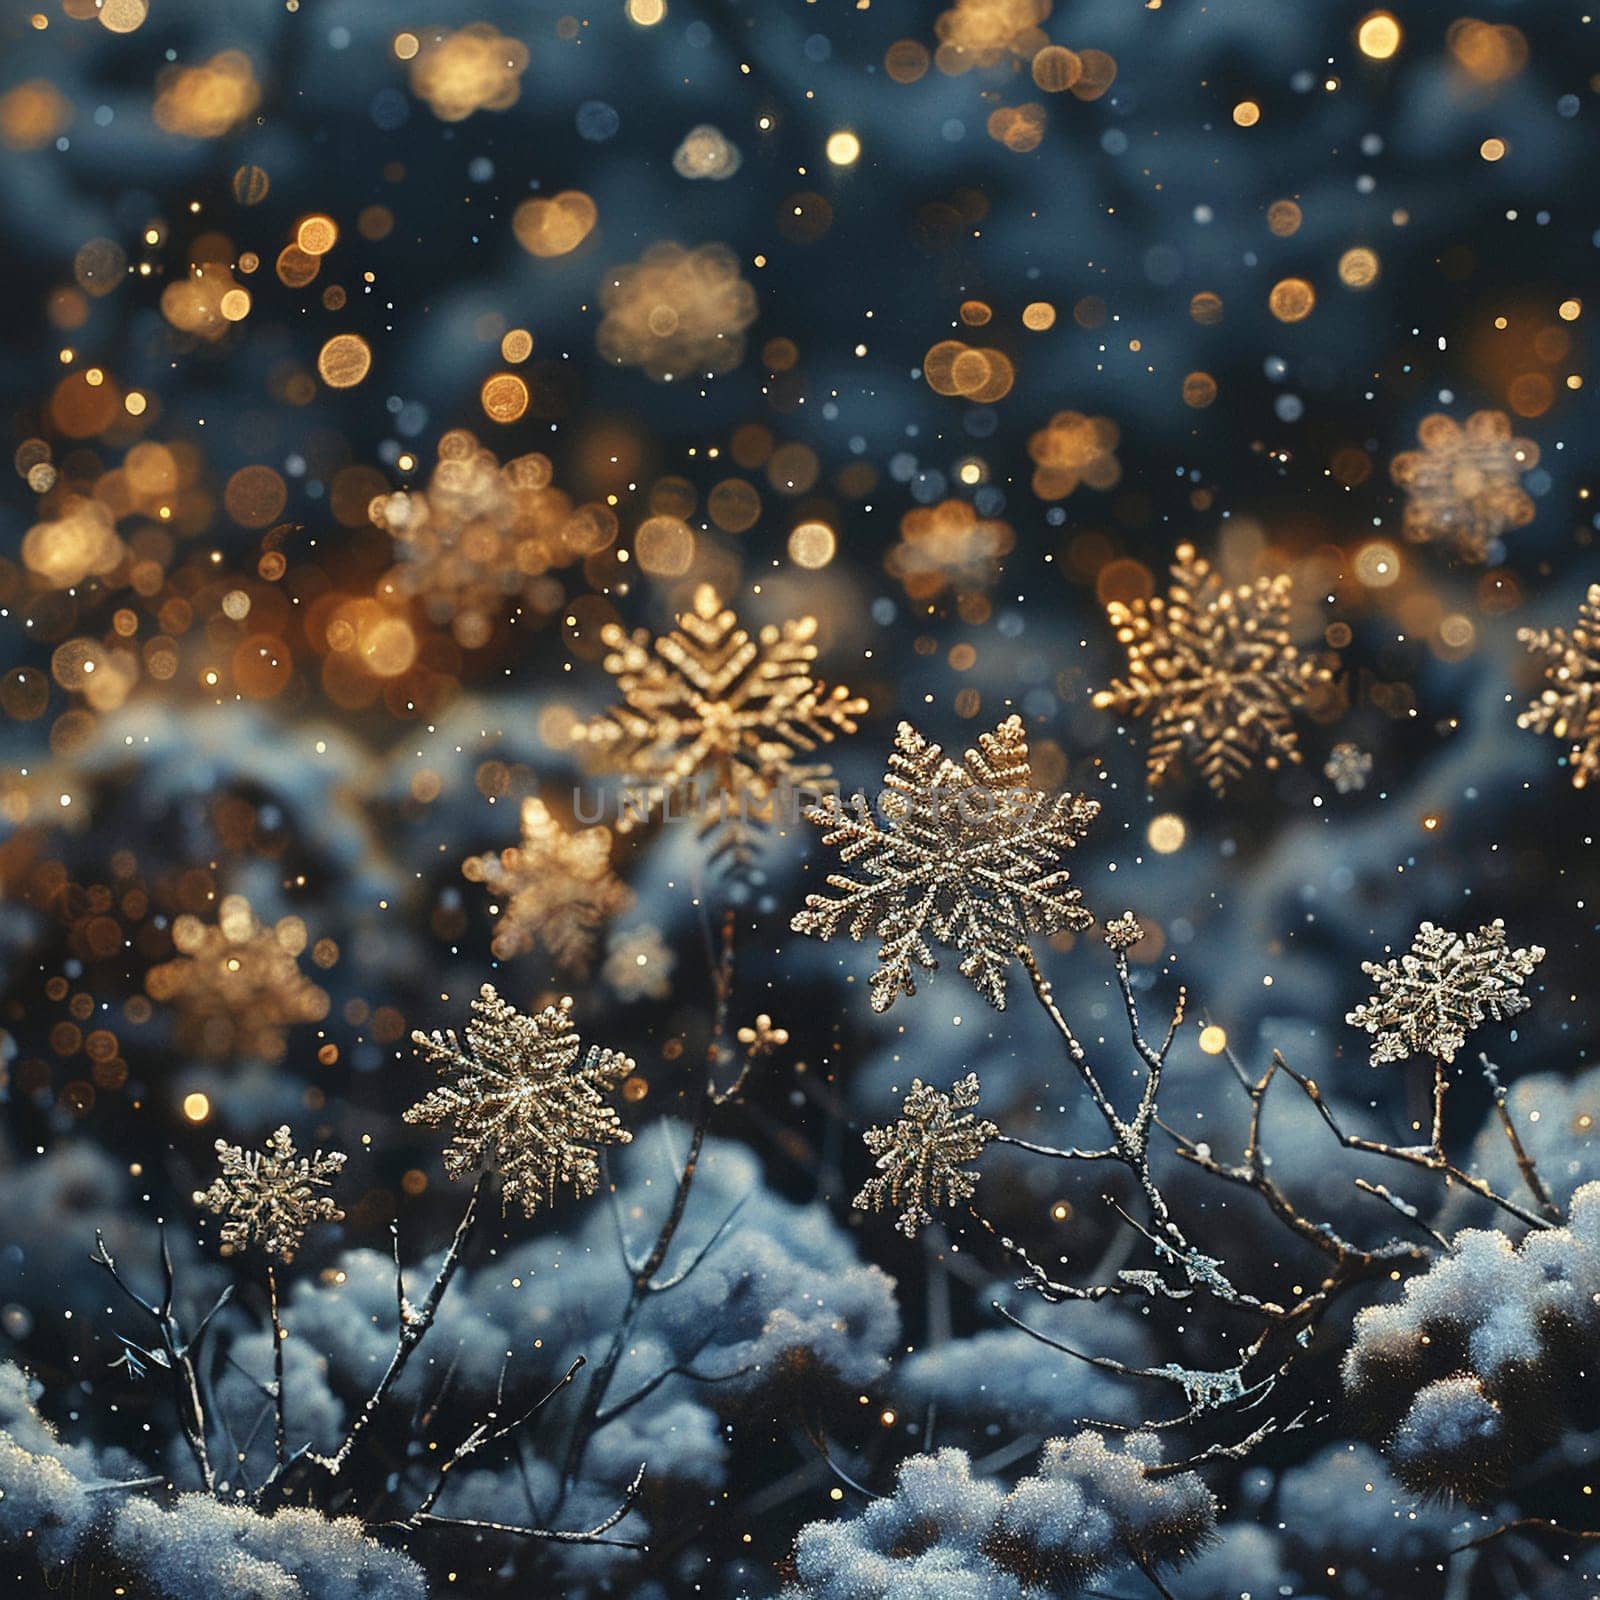 Snowflakes gently falling against the backdrop of a night sky, illustrating the silence of winter.